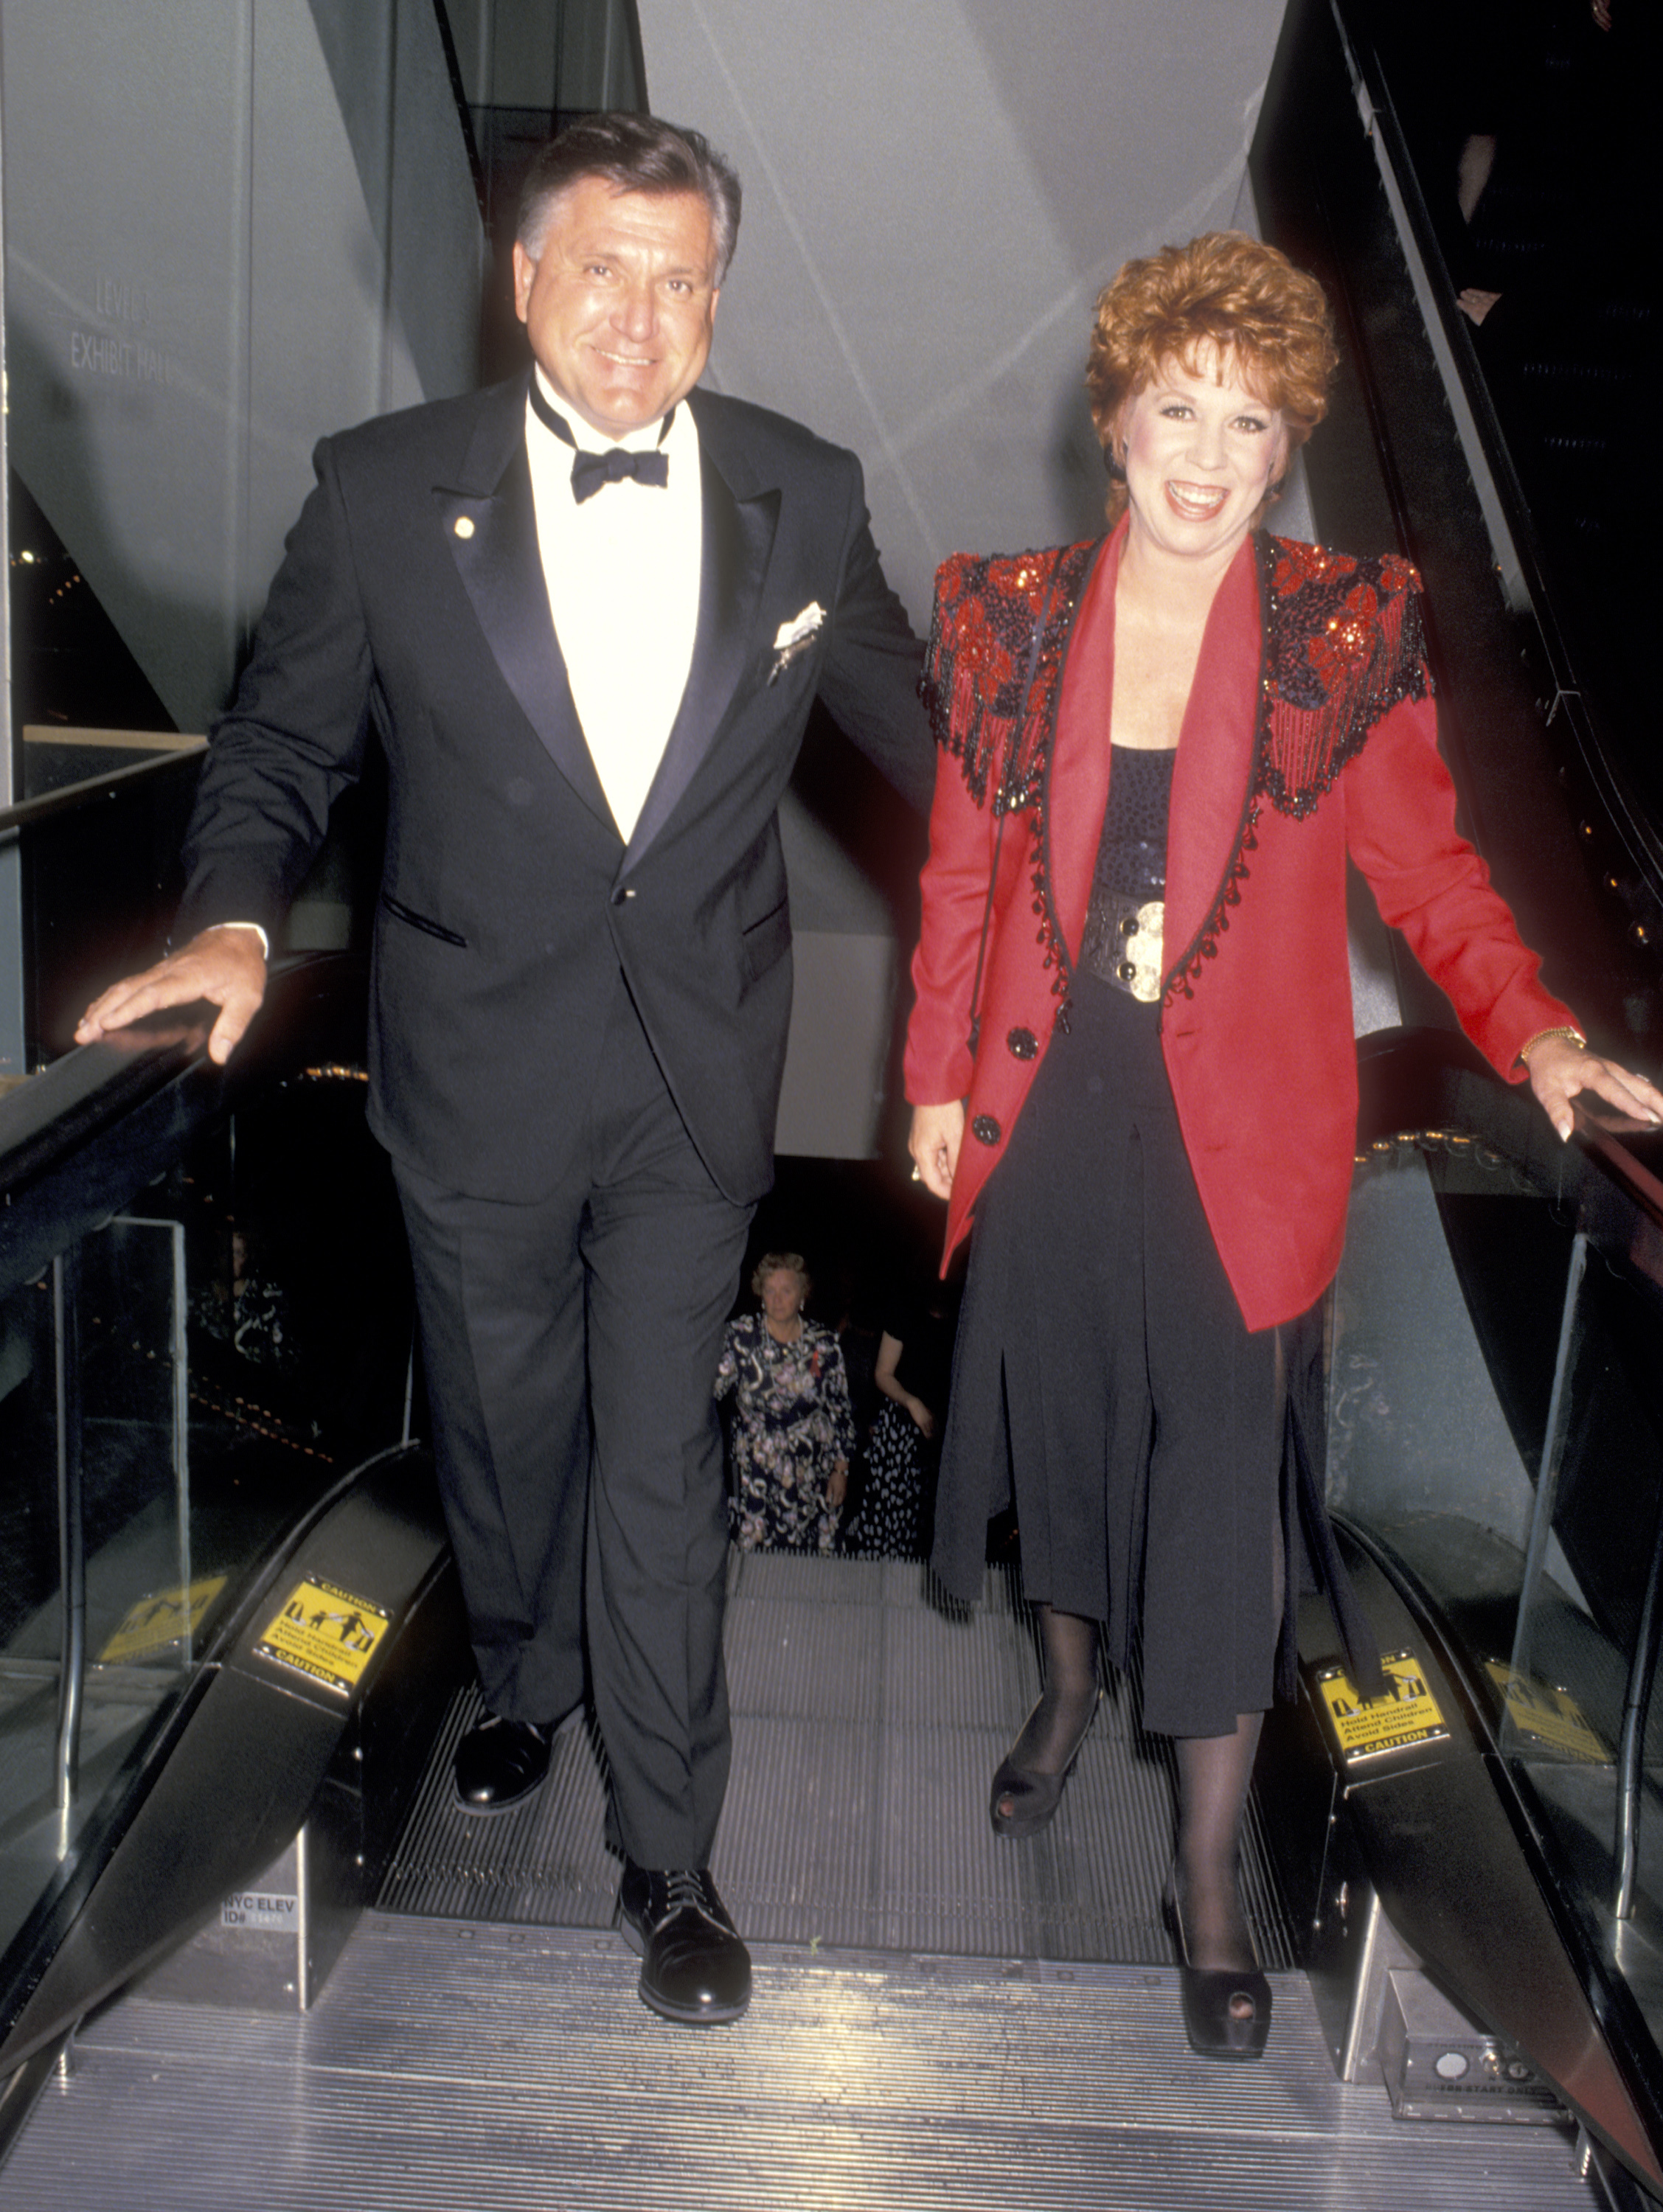 Alvin Schultz and Vicki Lawrence in New York City on May 26, 1993 | Source: Getty Images